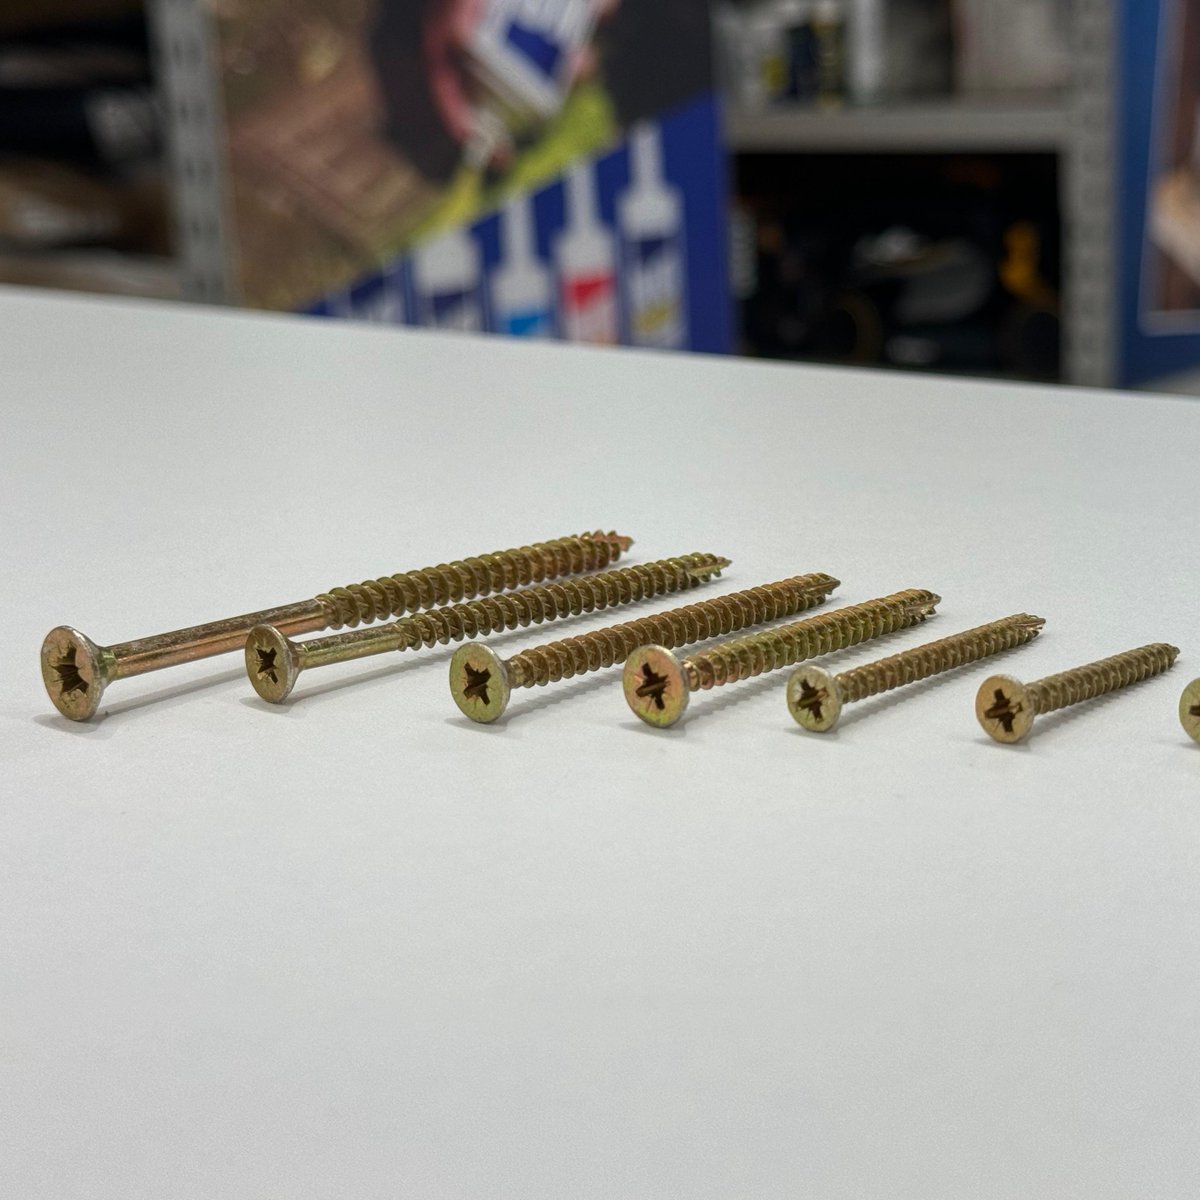 TurboGold PZ Double Countersunk Wood Screws are officially the gold standard of screws… We should know.😂 The rifled shank reduces splitting and they are wax-coated for easy driving. Get them here: bit.ly/3wI2igI